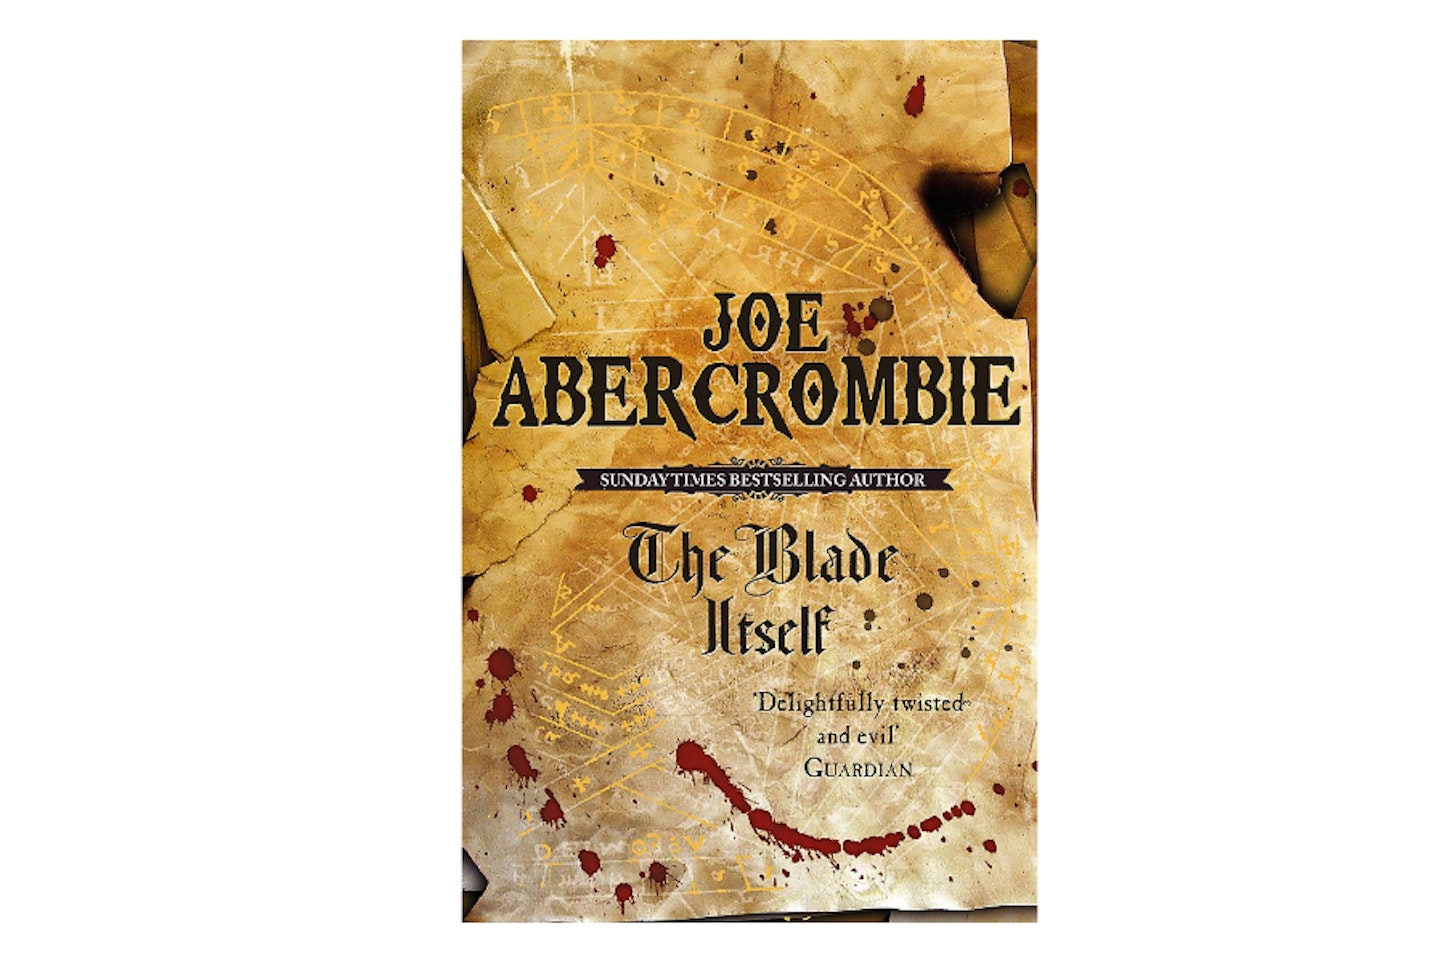 The Blade Itself (The First Law Book One) by Joe Abercrombie